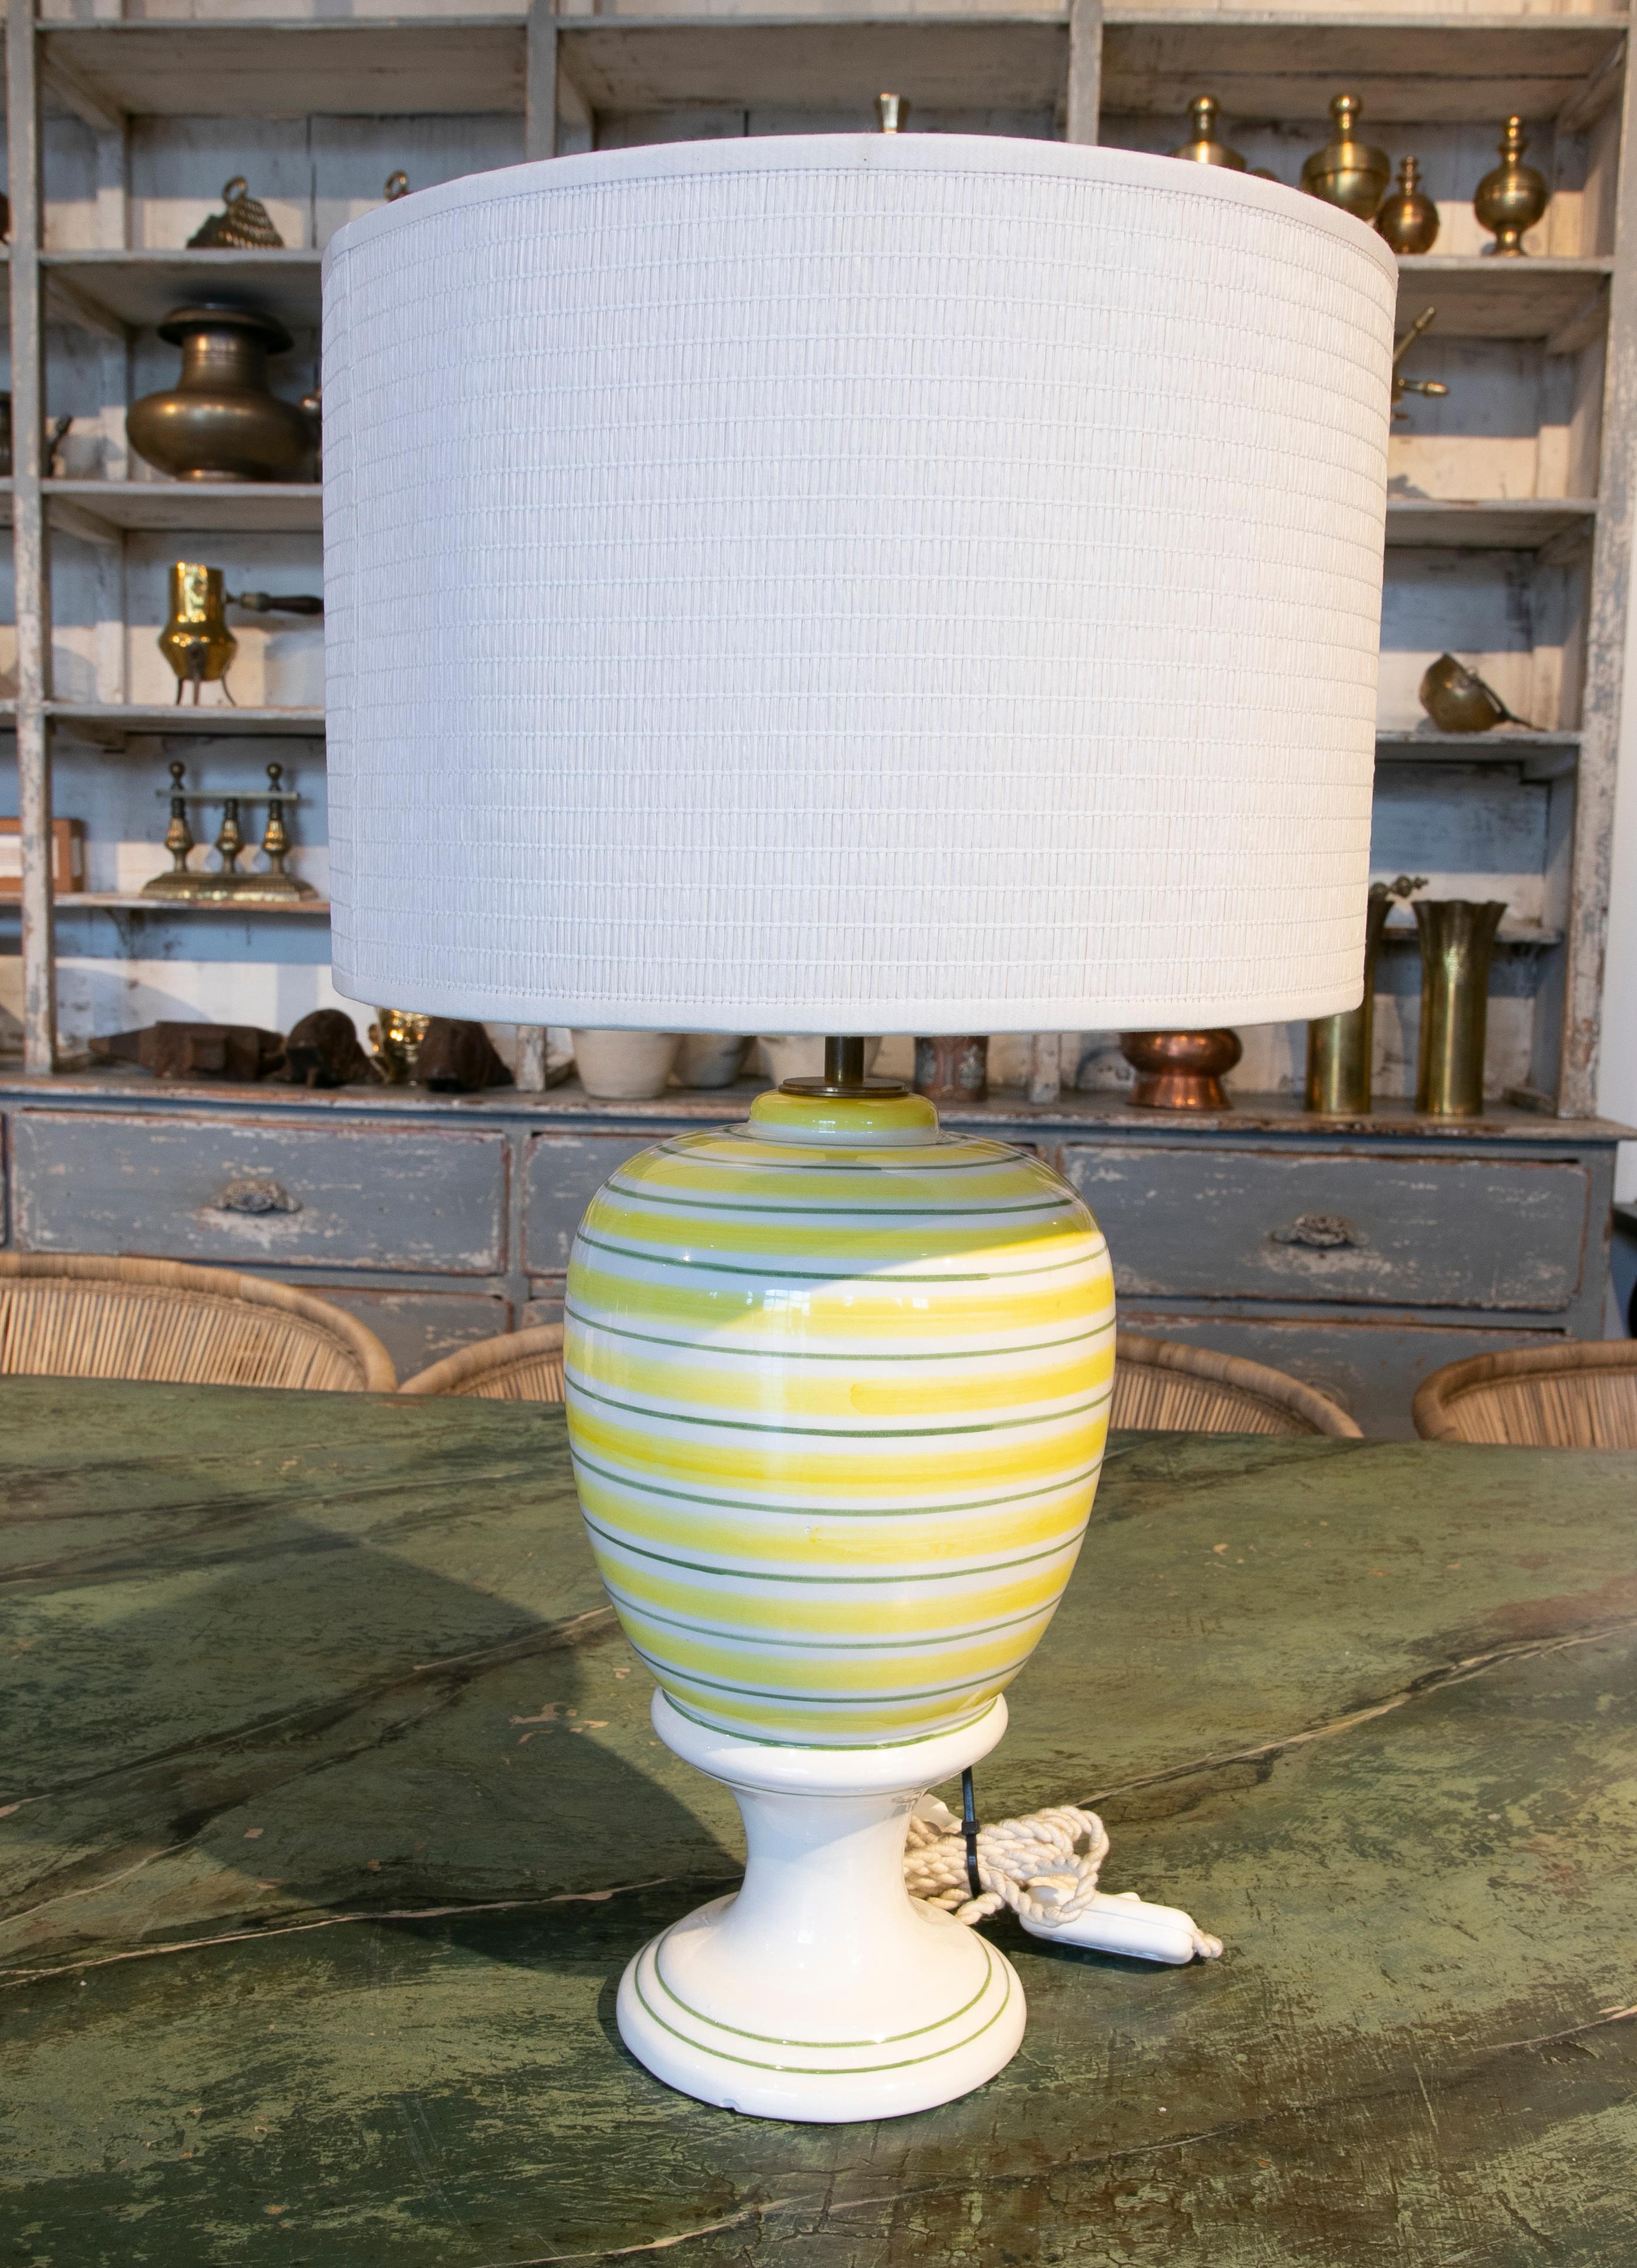 Hand painted Porcelain table lamp
Measurement is without screen
The price does not include the screen.